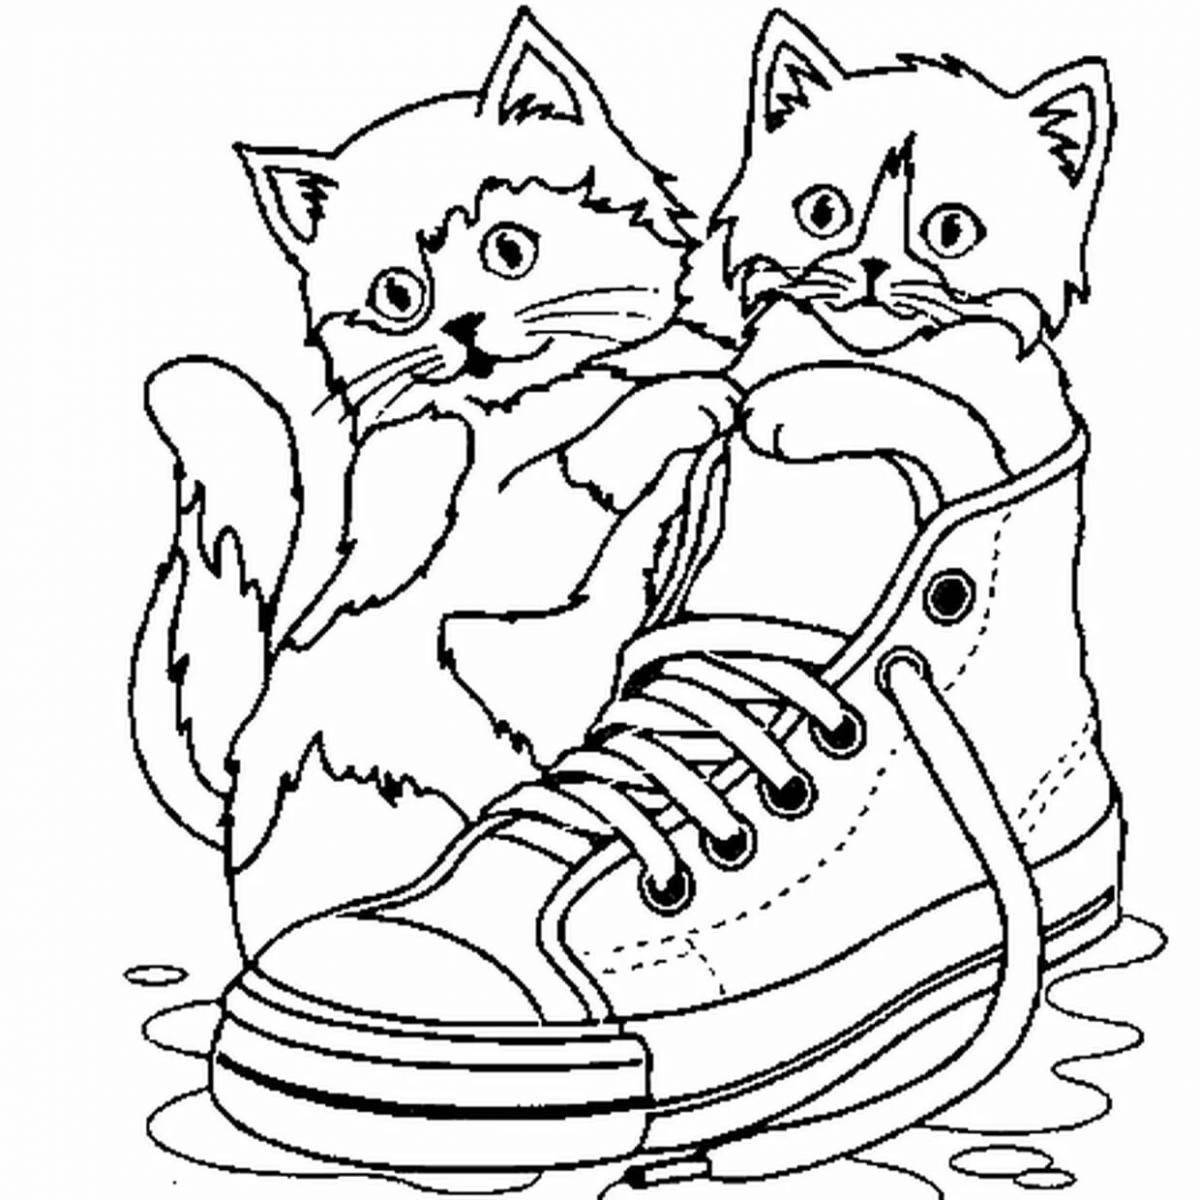 Exquisite real cat coloring book